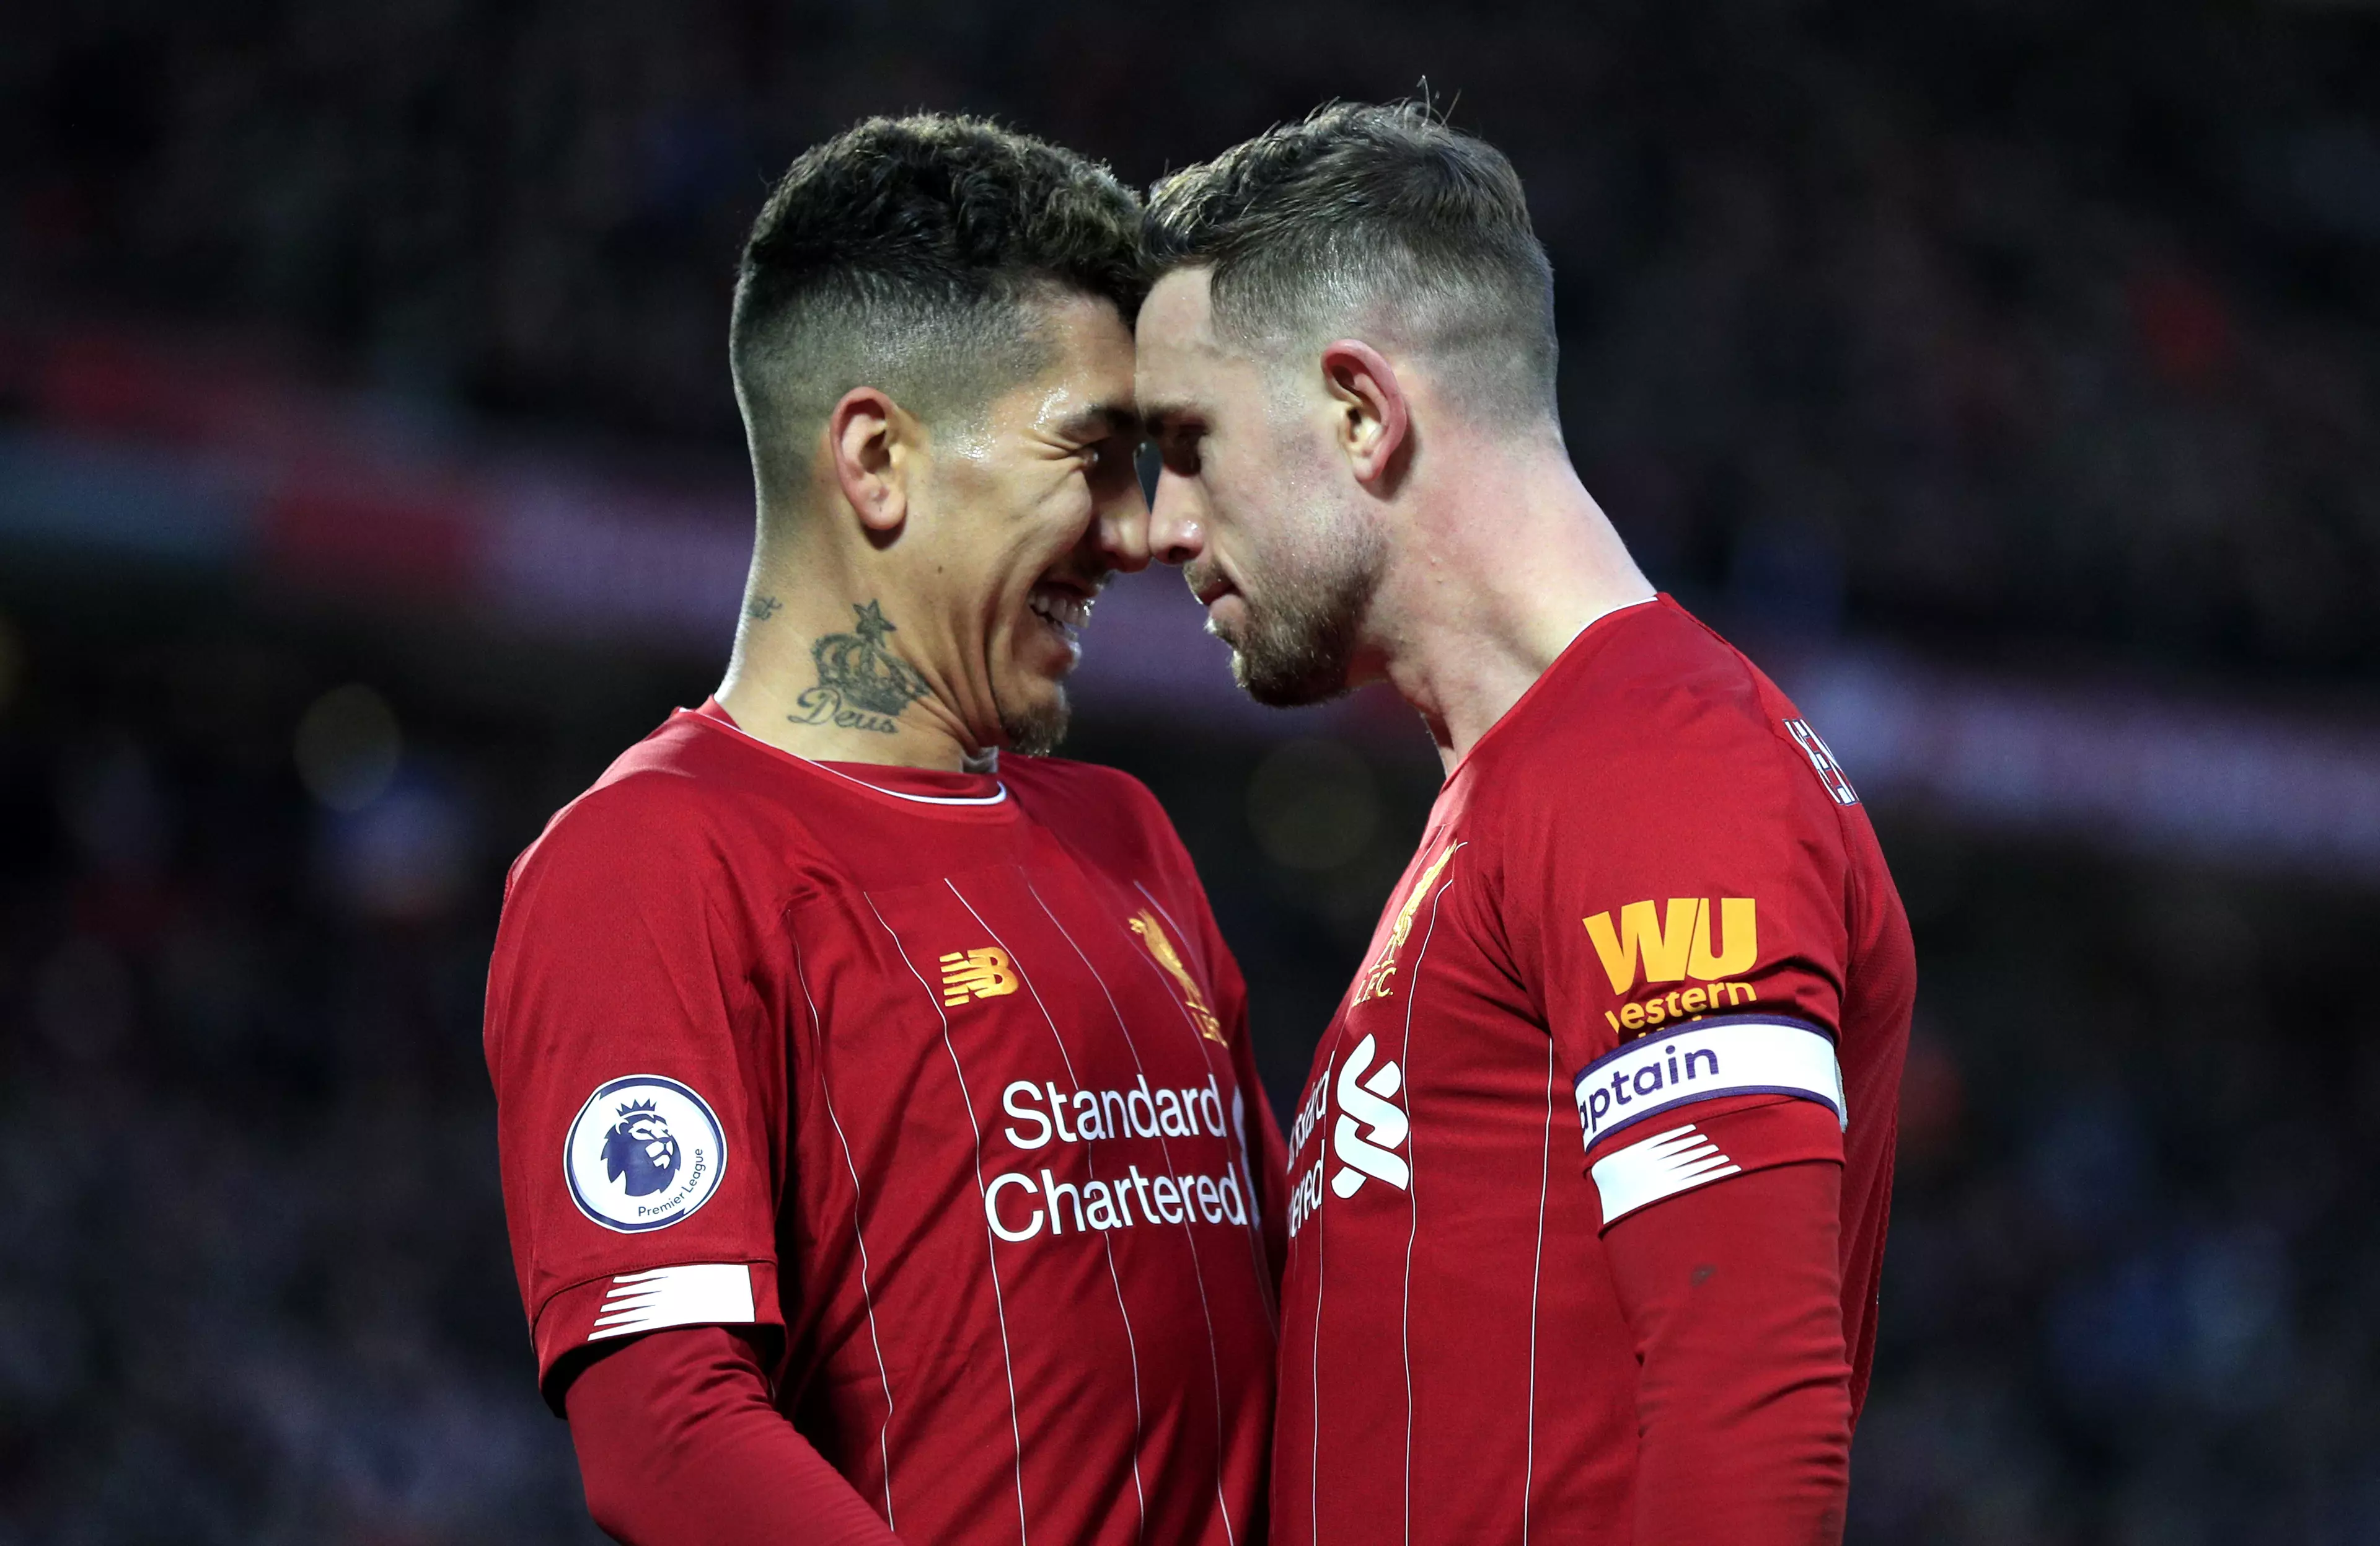 Henderson celebrates with Roberto Firmino during the 4-0 win over Southampton. (Image